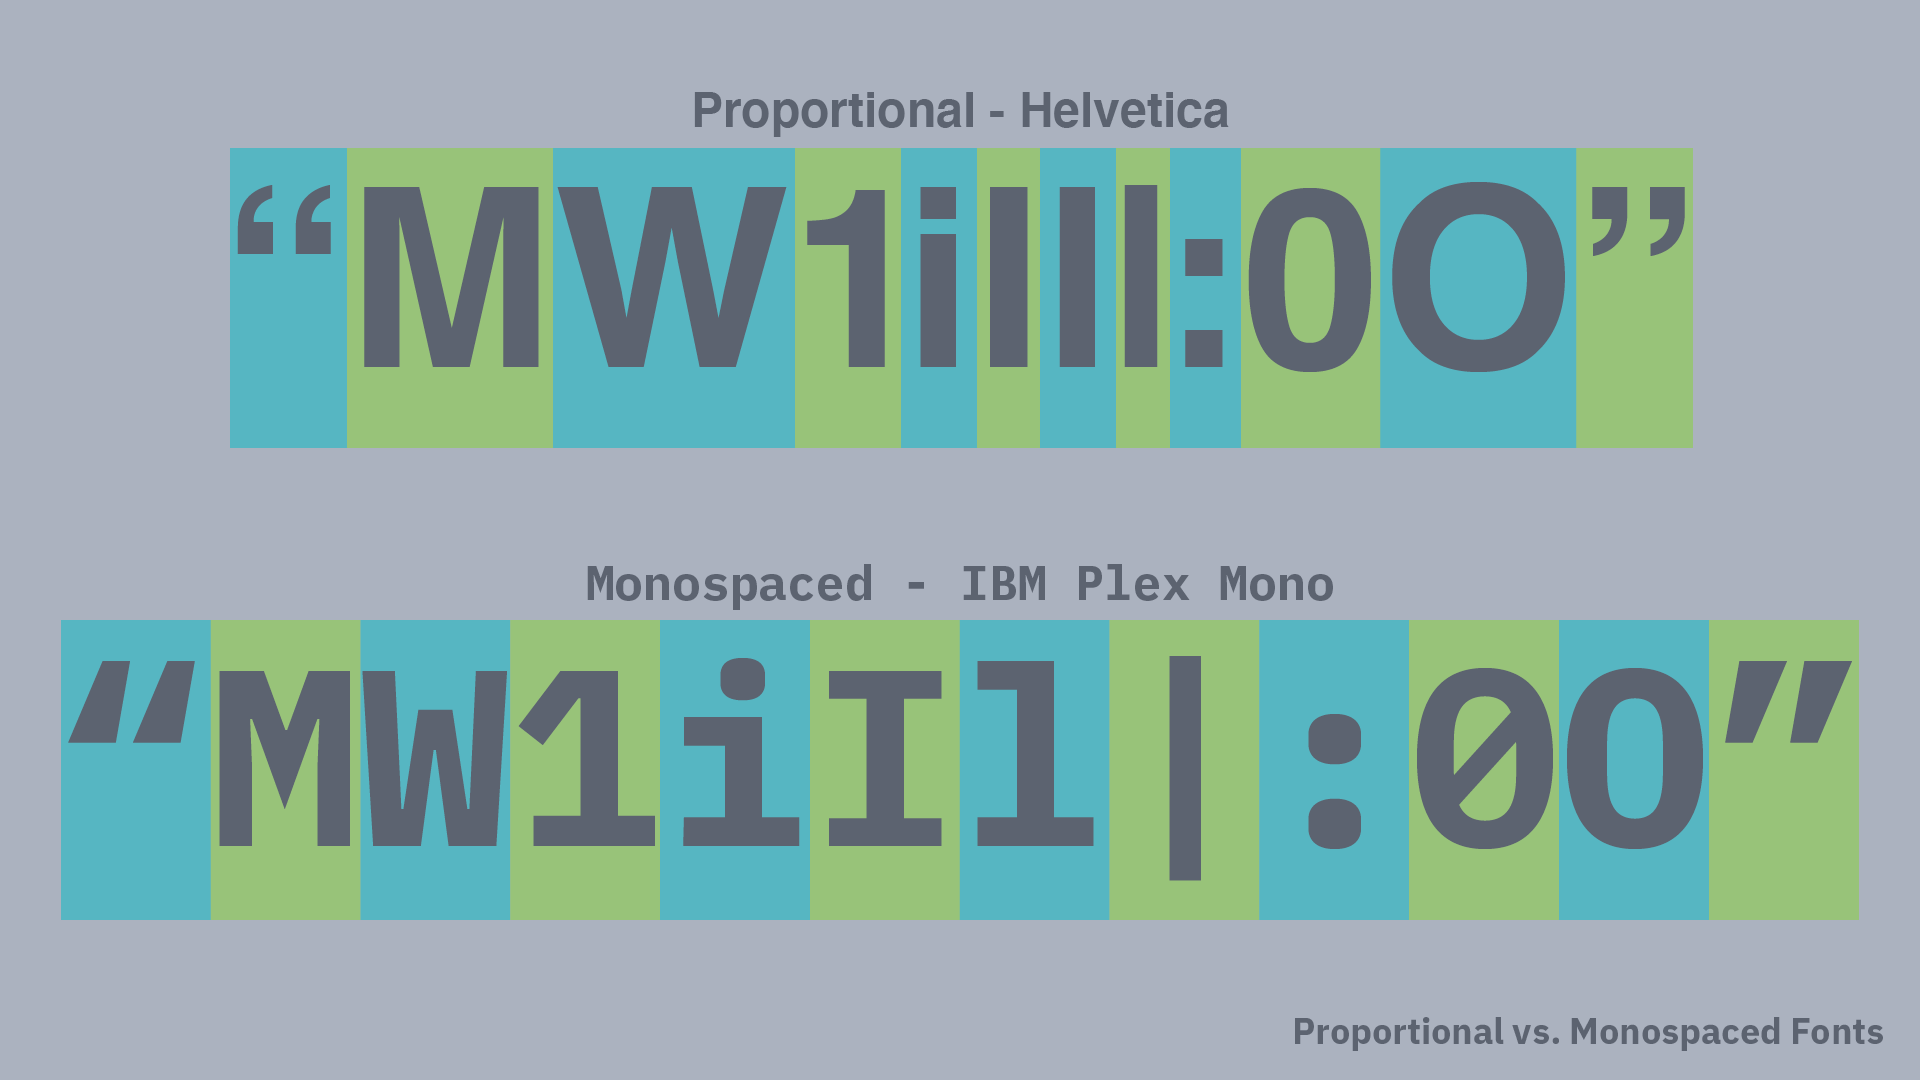 Common characters that  need to be visually different in monospaced fonts